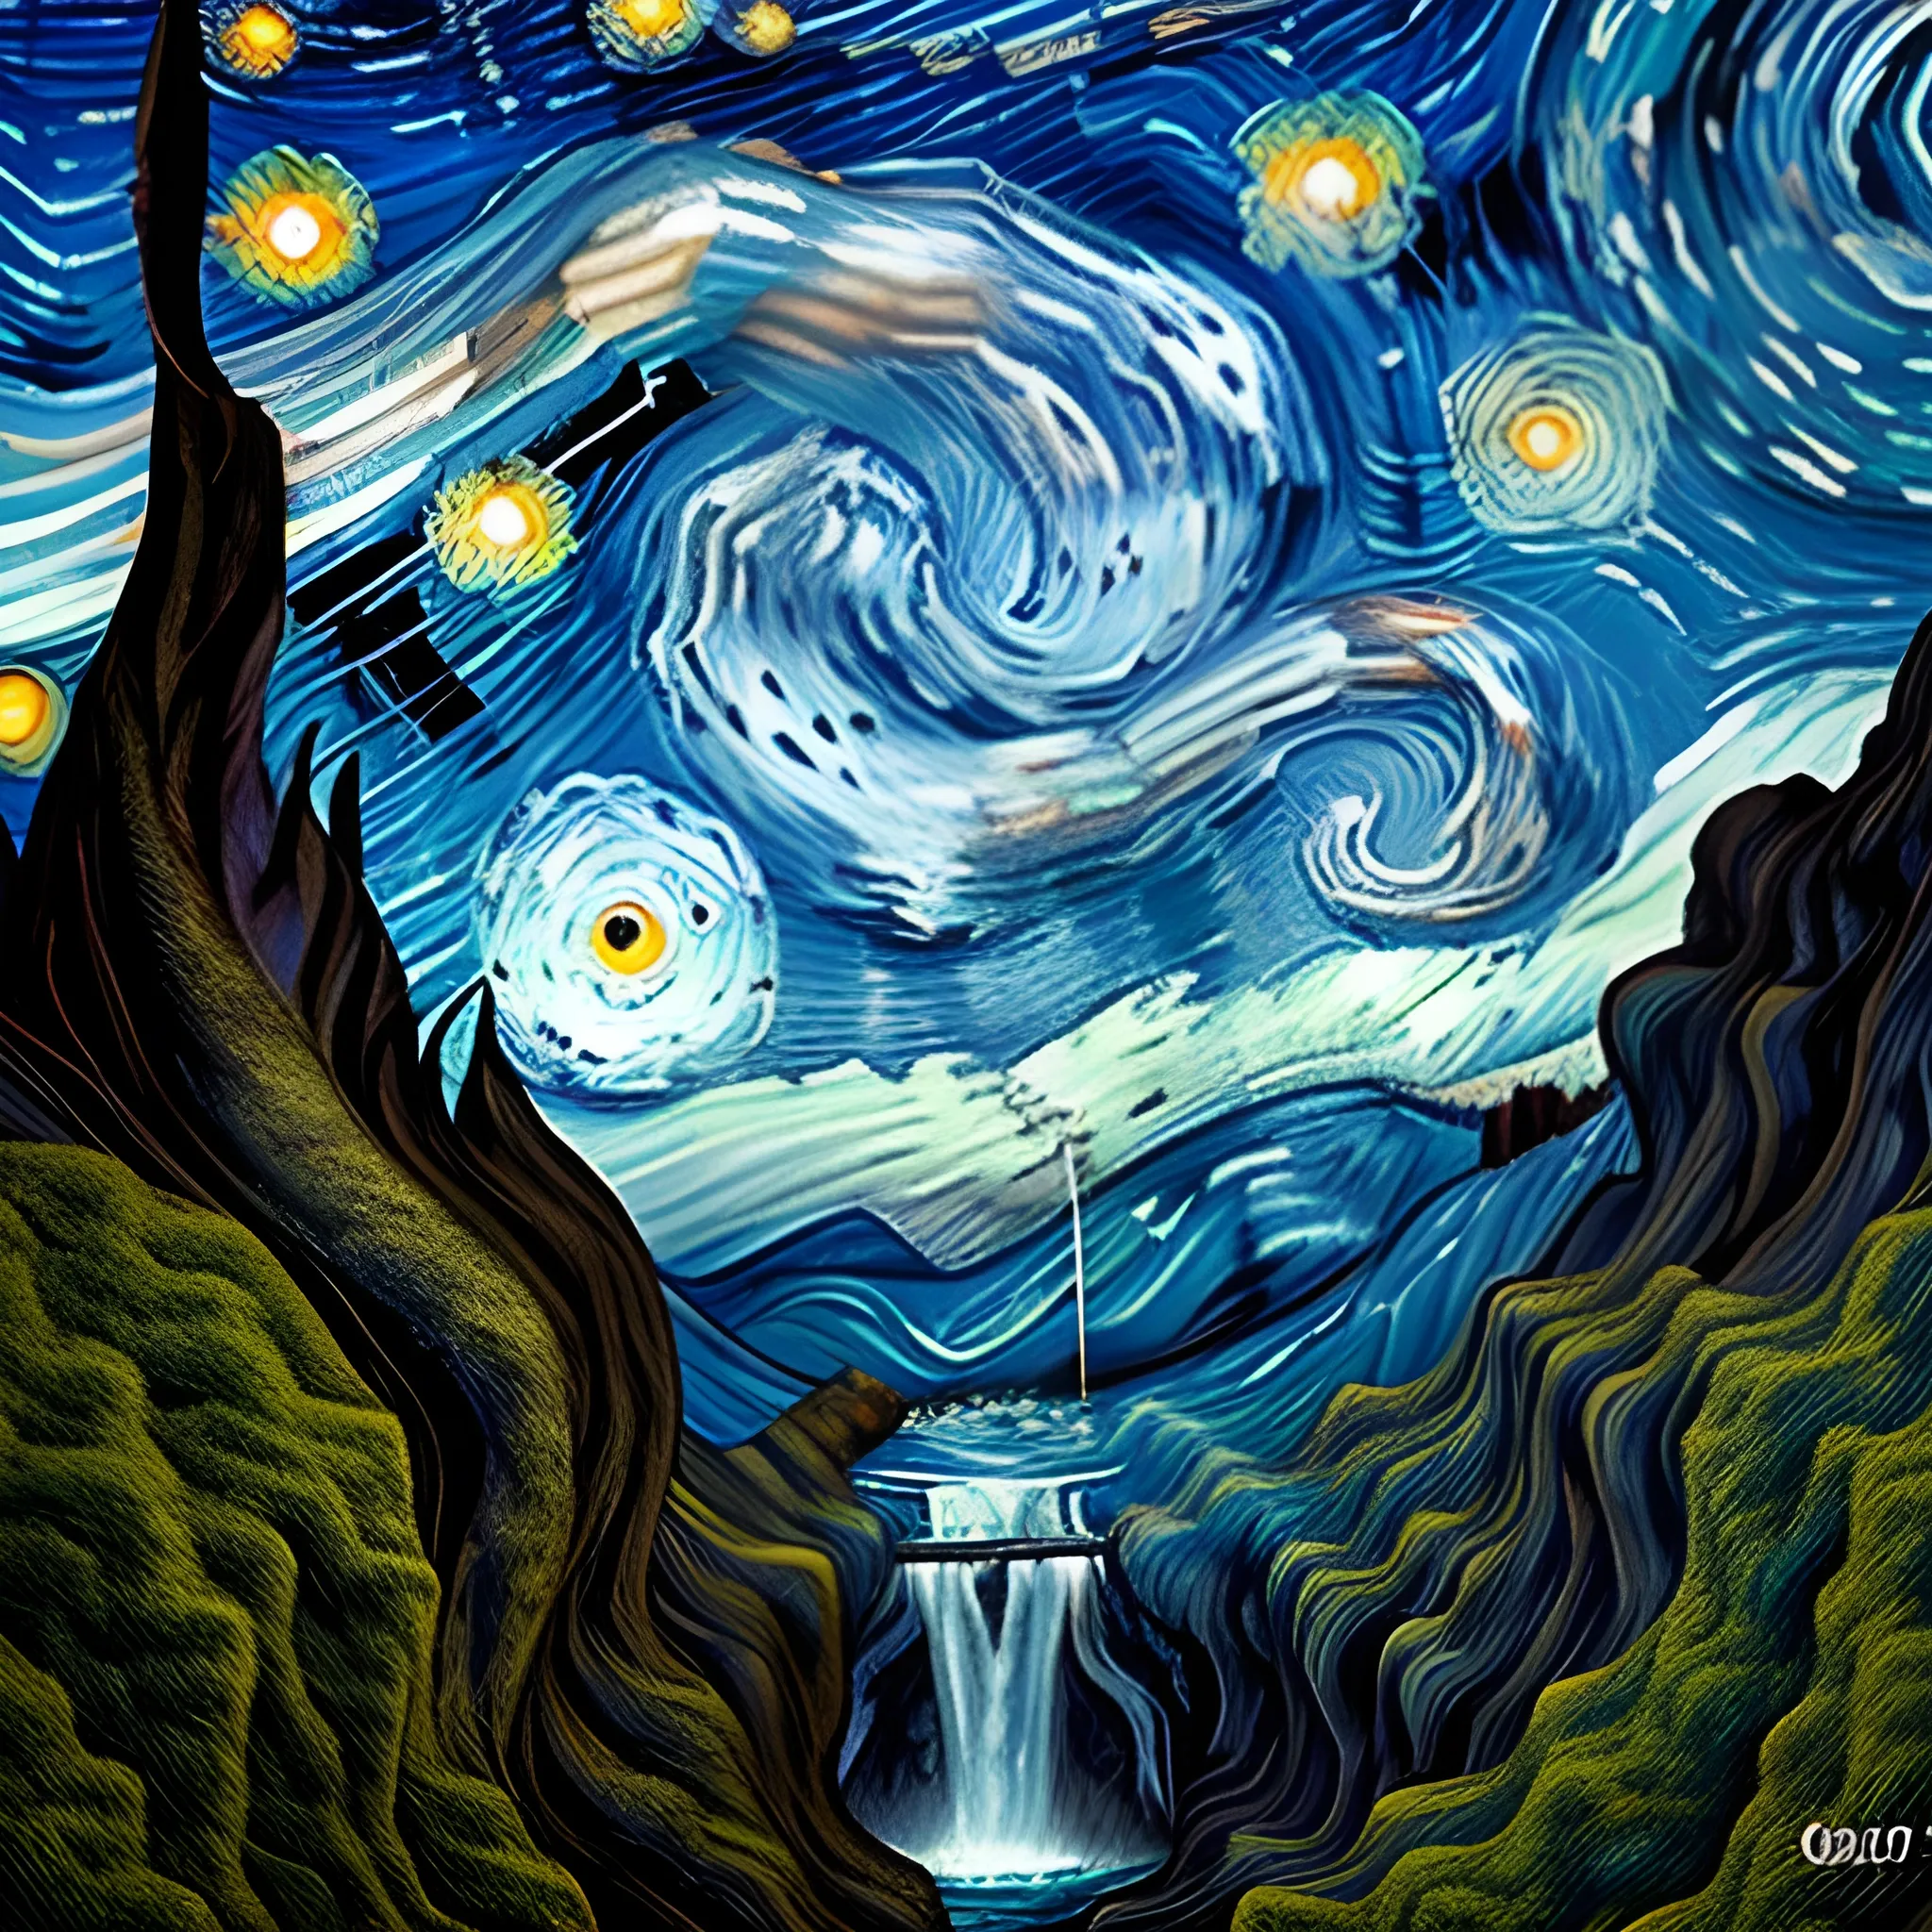 face sculpted in an immense mountain of limestone rock and waterfalls gushing from these 2 eyes towards a lake in the foreground, a starry night sky with spinning stars in the background